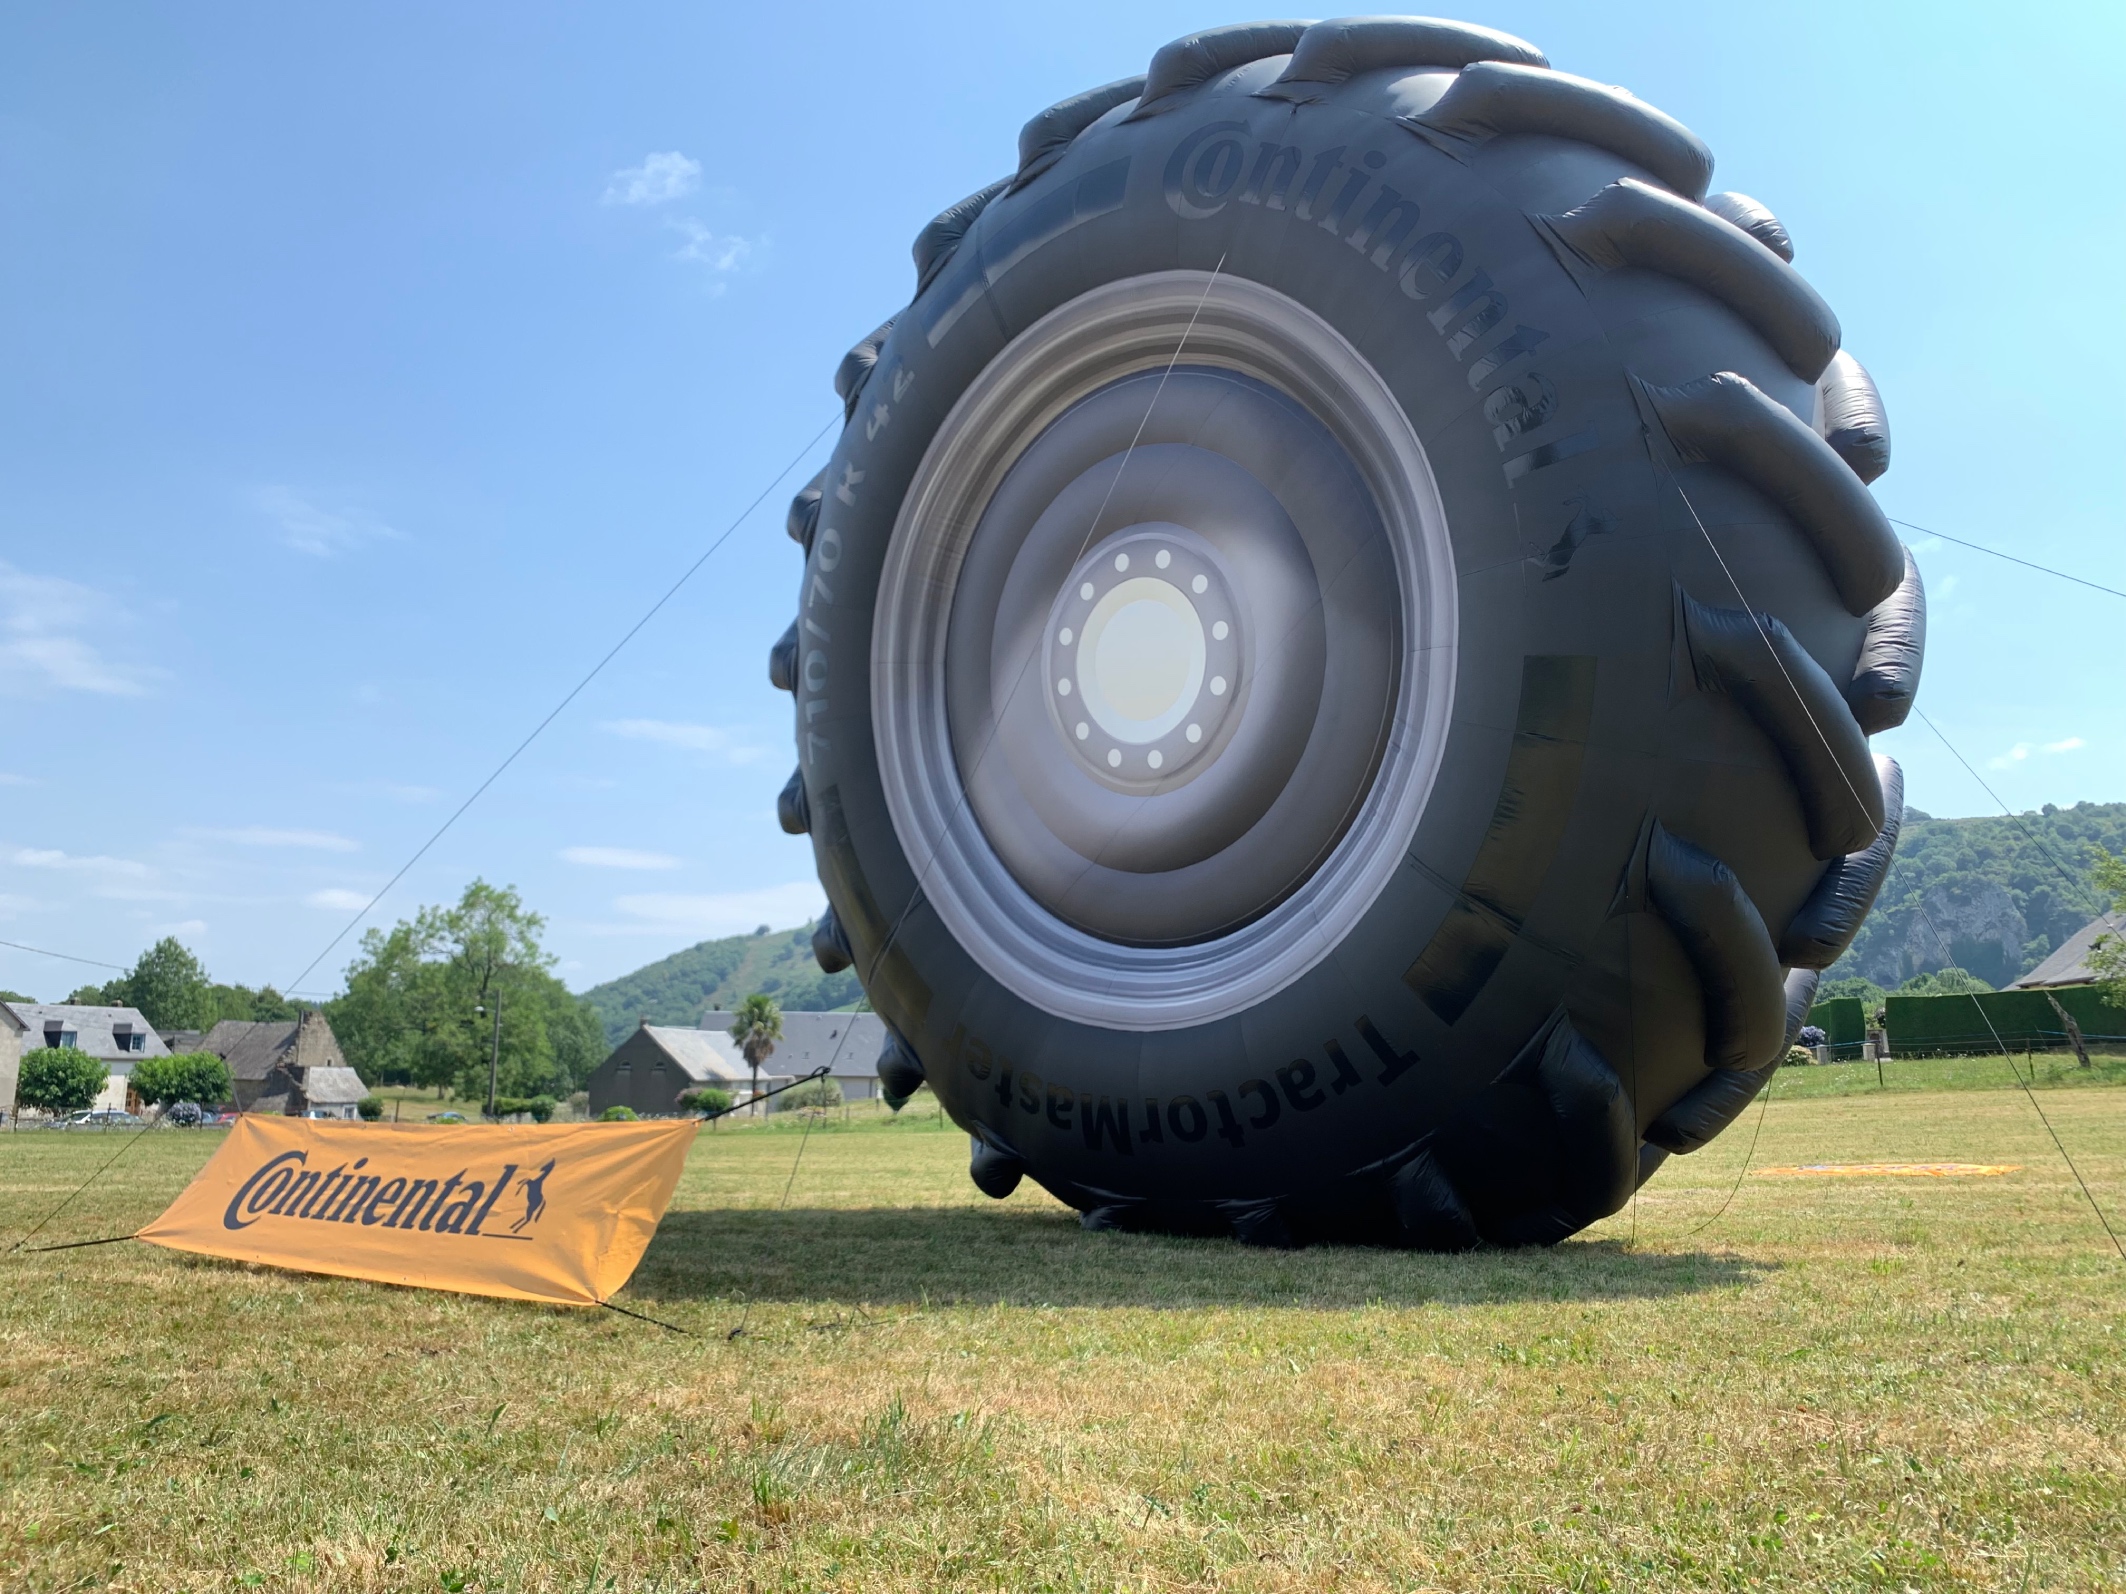 Continental advertises with a giant inflatable TractorMaster tire along the 2022 Tour de France